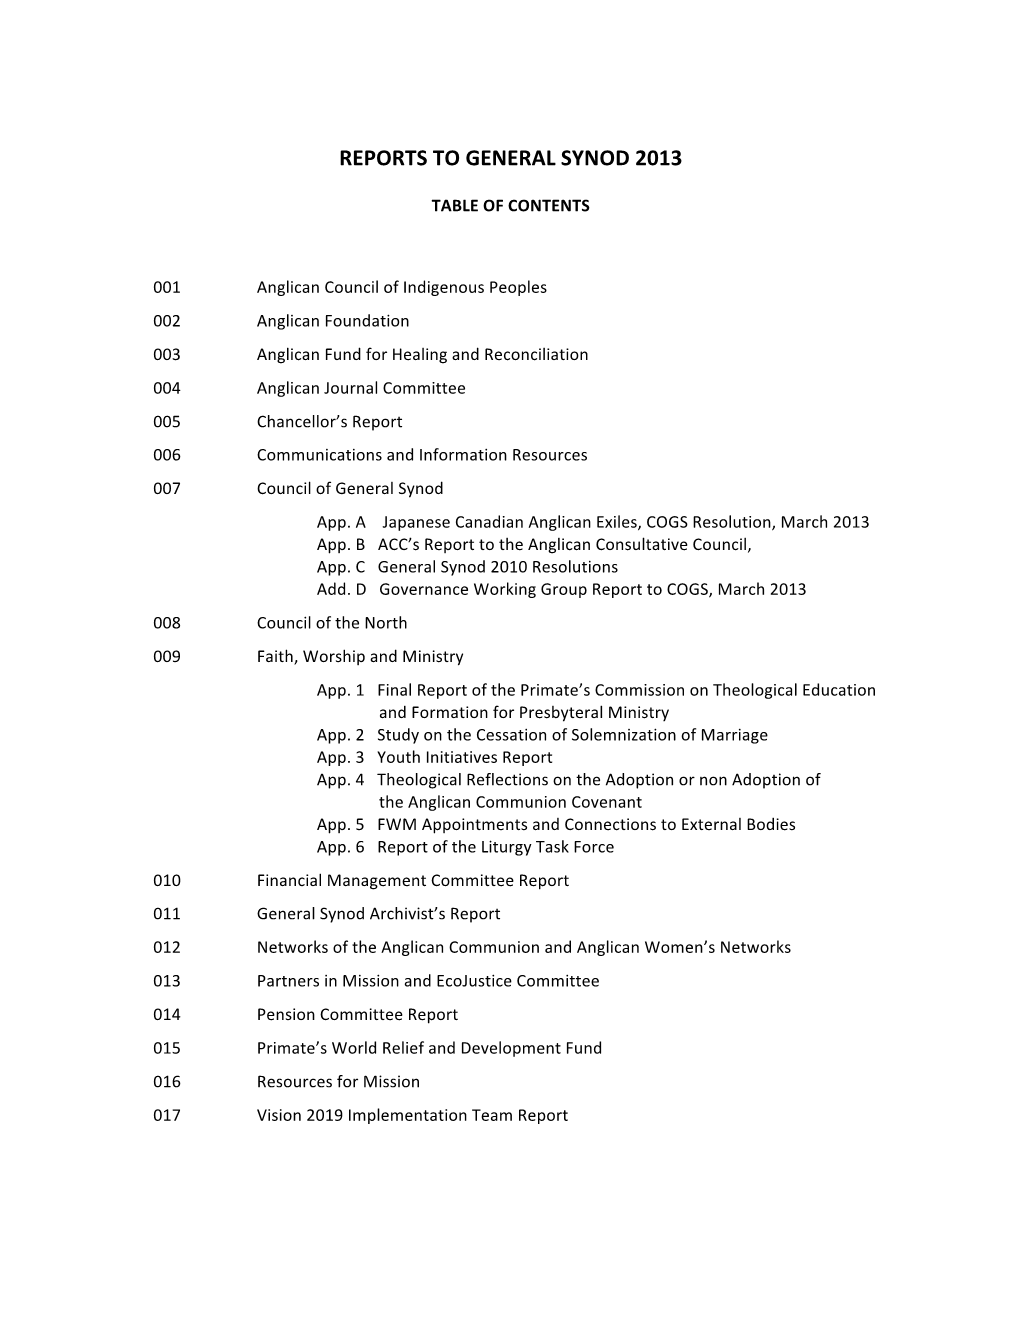 000 Report Index General Synod 2013 REVISED 2